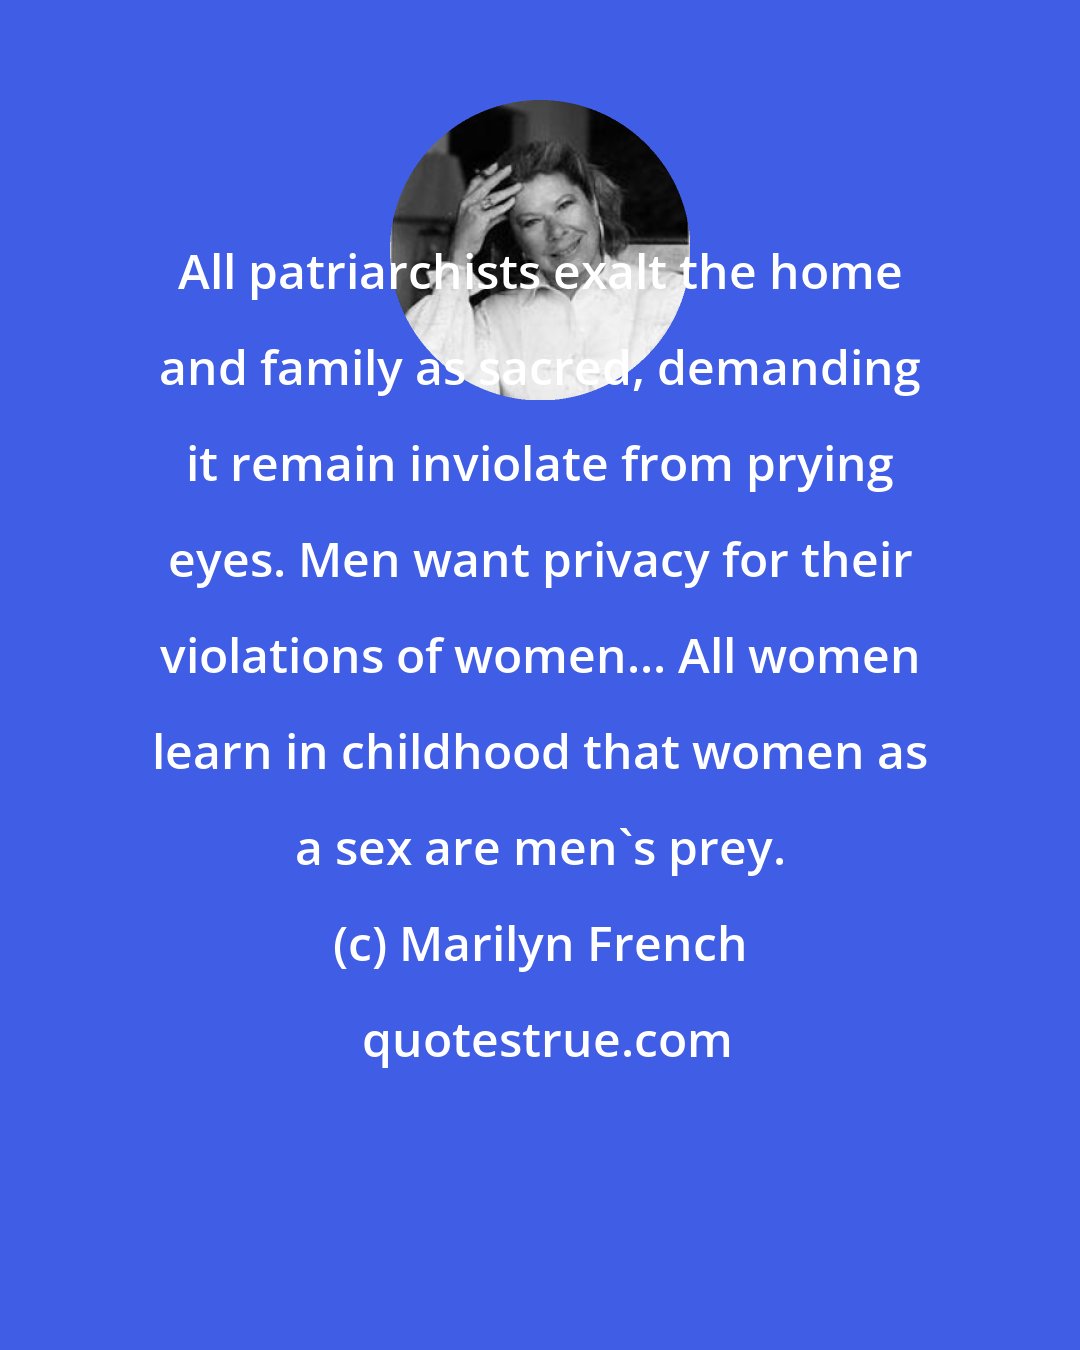 Marilyn French: All patriarchists exalt the home and family as sacred, demanding it remain inviolate from prying eyes. Men want privacy for their violations of women... All women learn in childhood that women as a sex are men's prey.